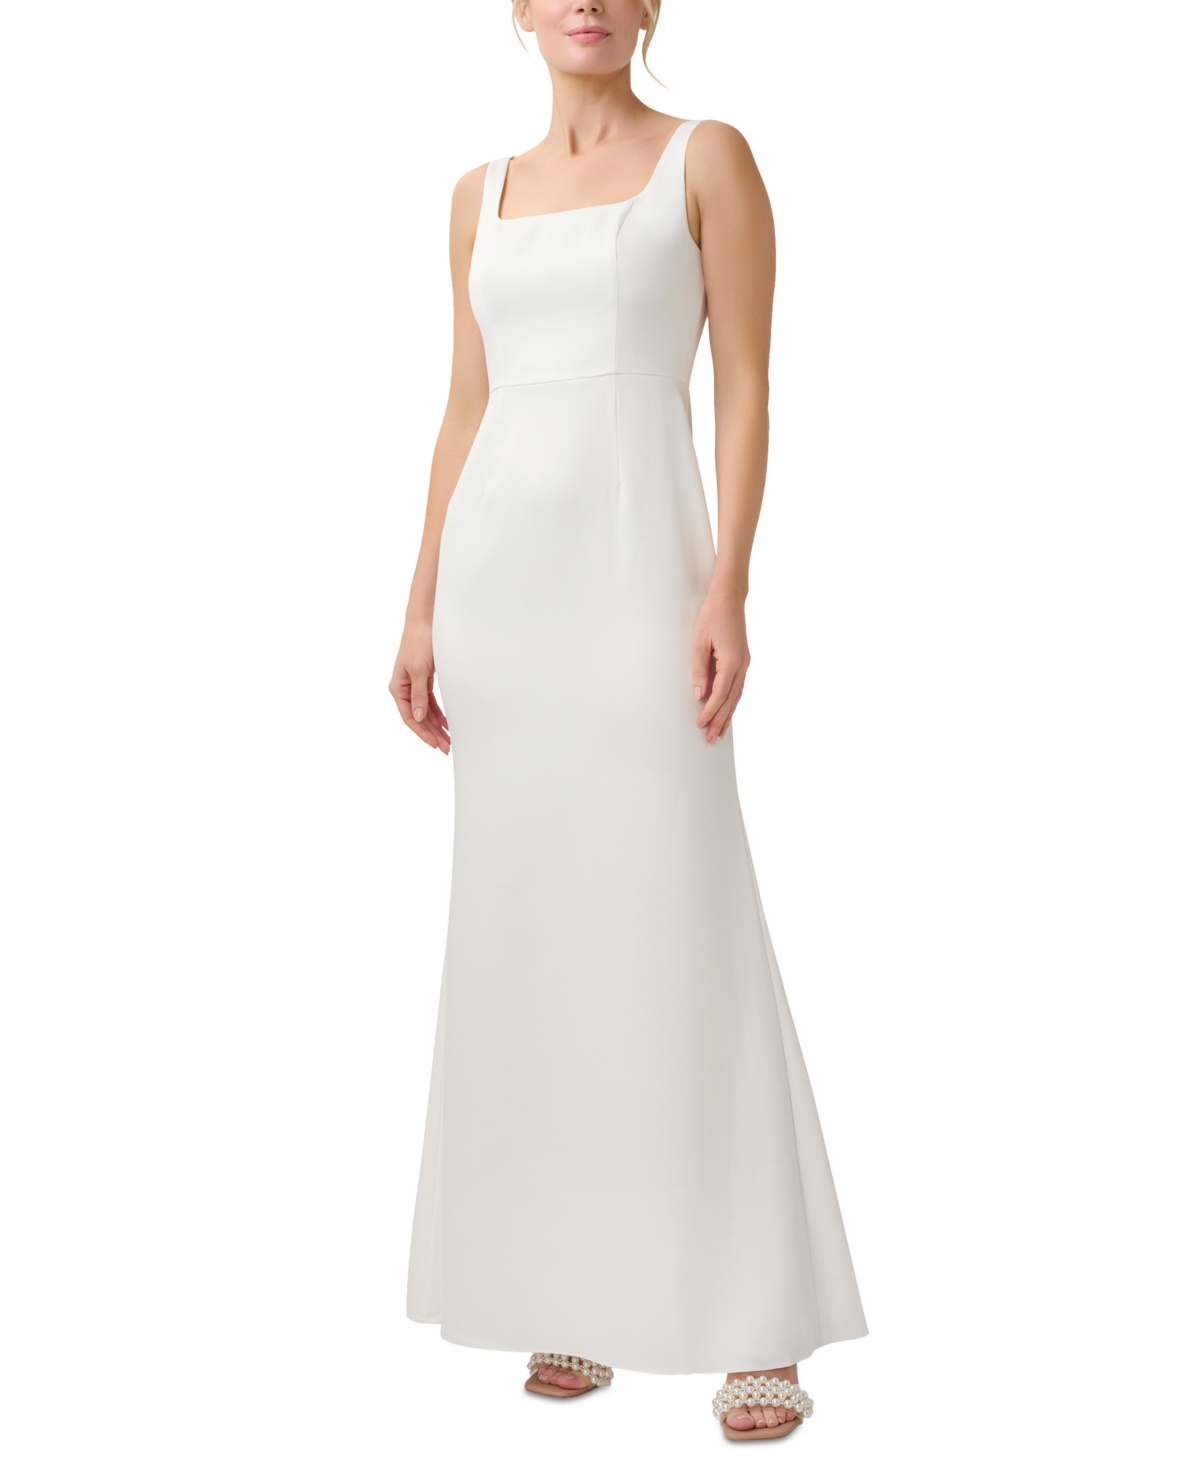 ADRIANNA PAPELL WOMEN'S SQUARE-NECK MERMAID GOWN